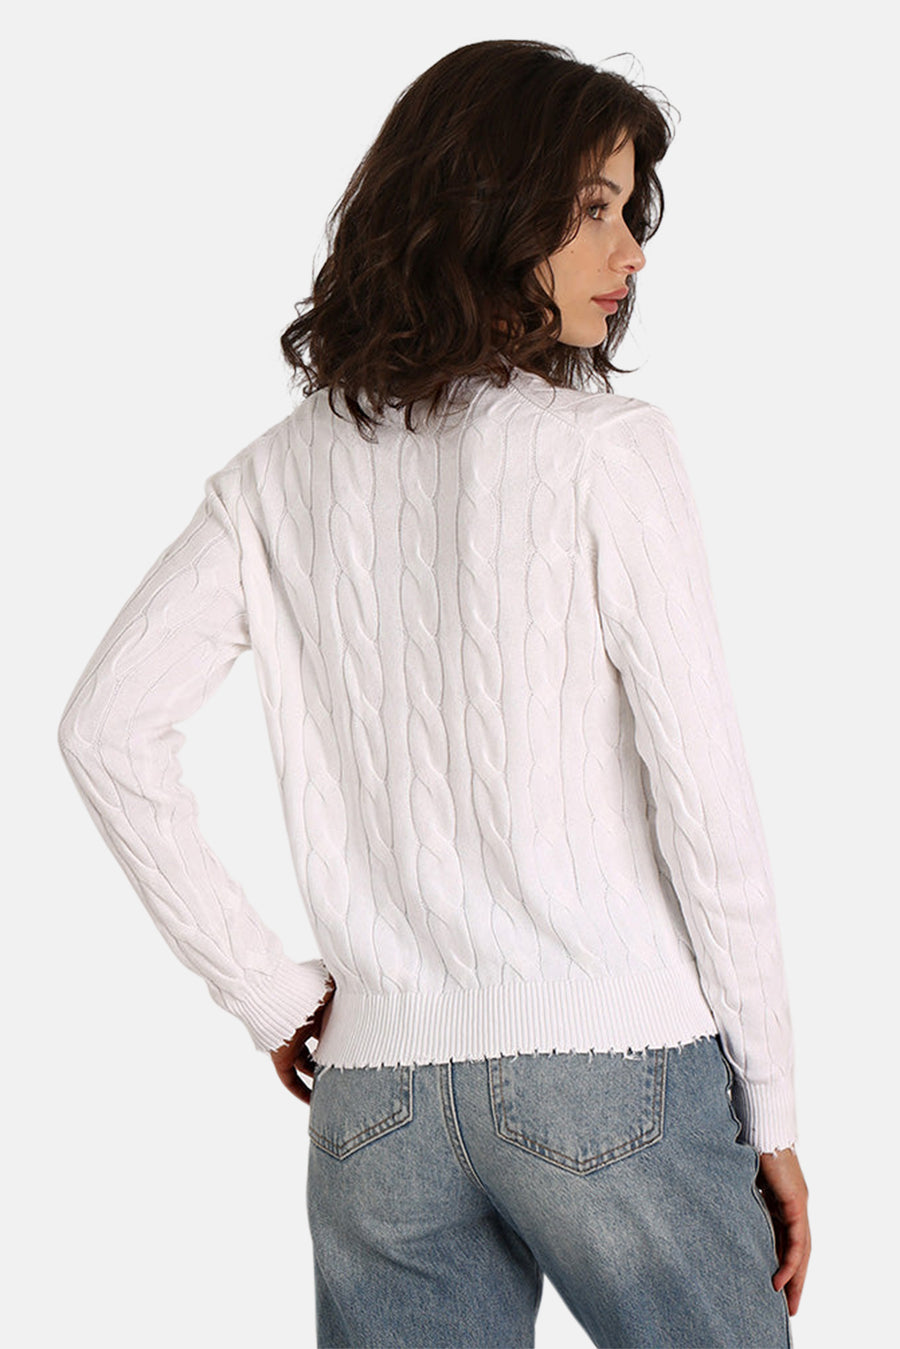 Cotton Cable Cardigan White